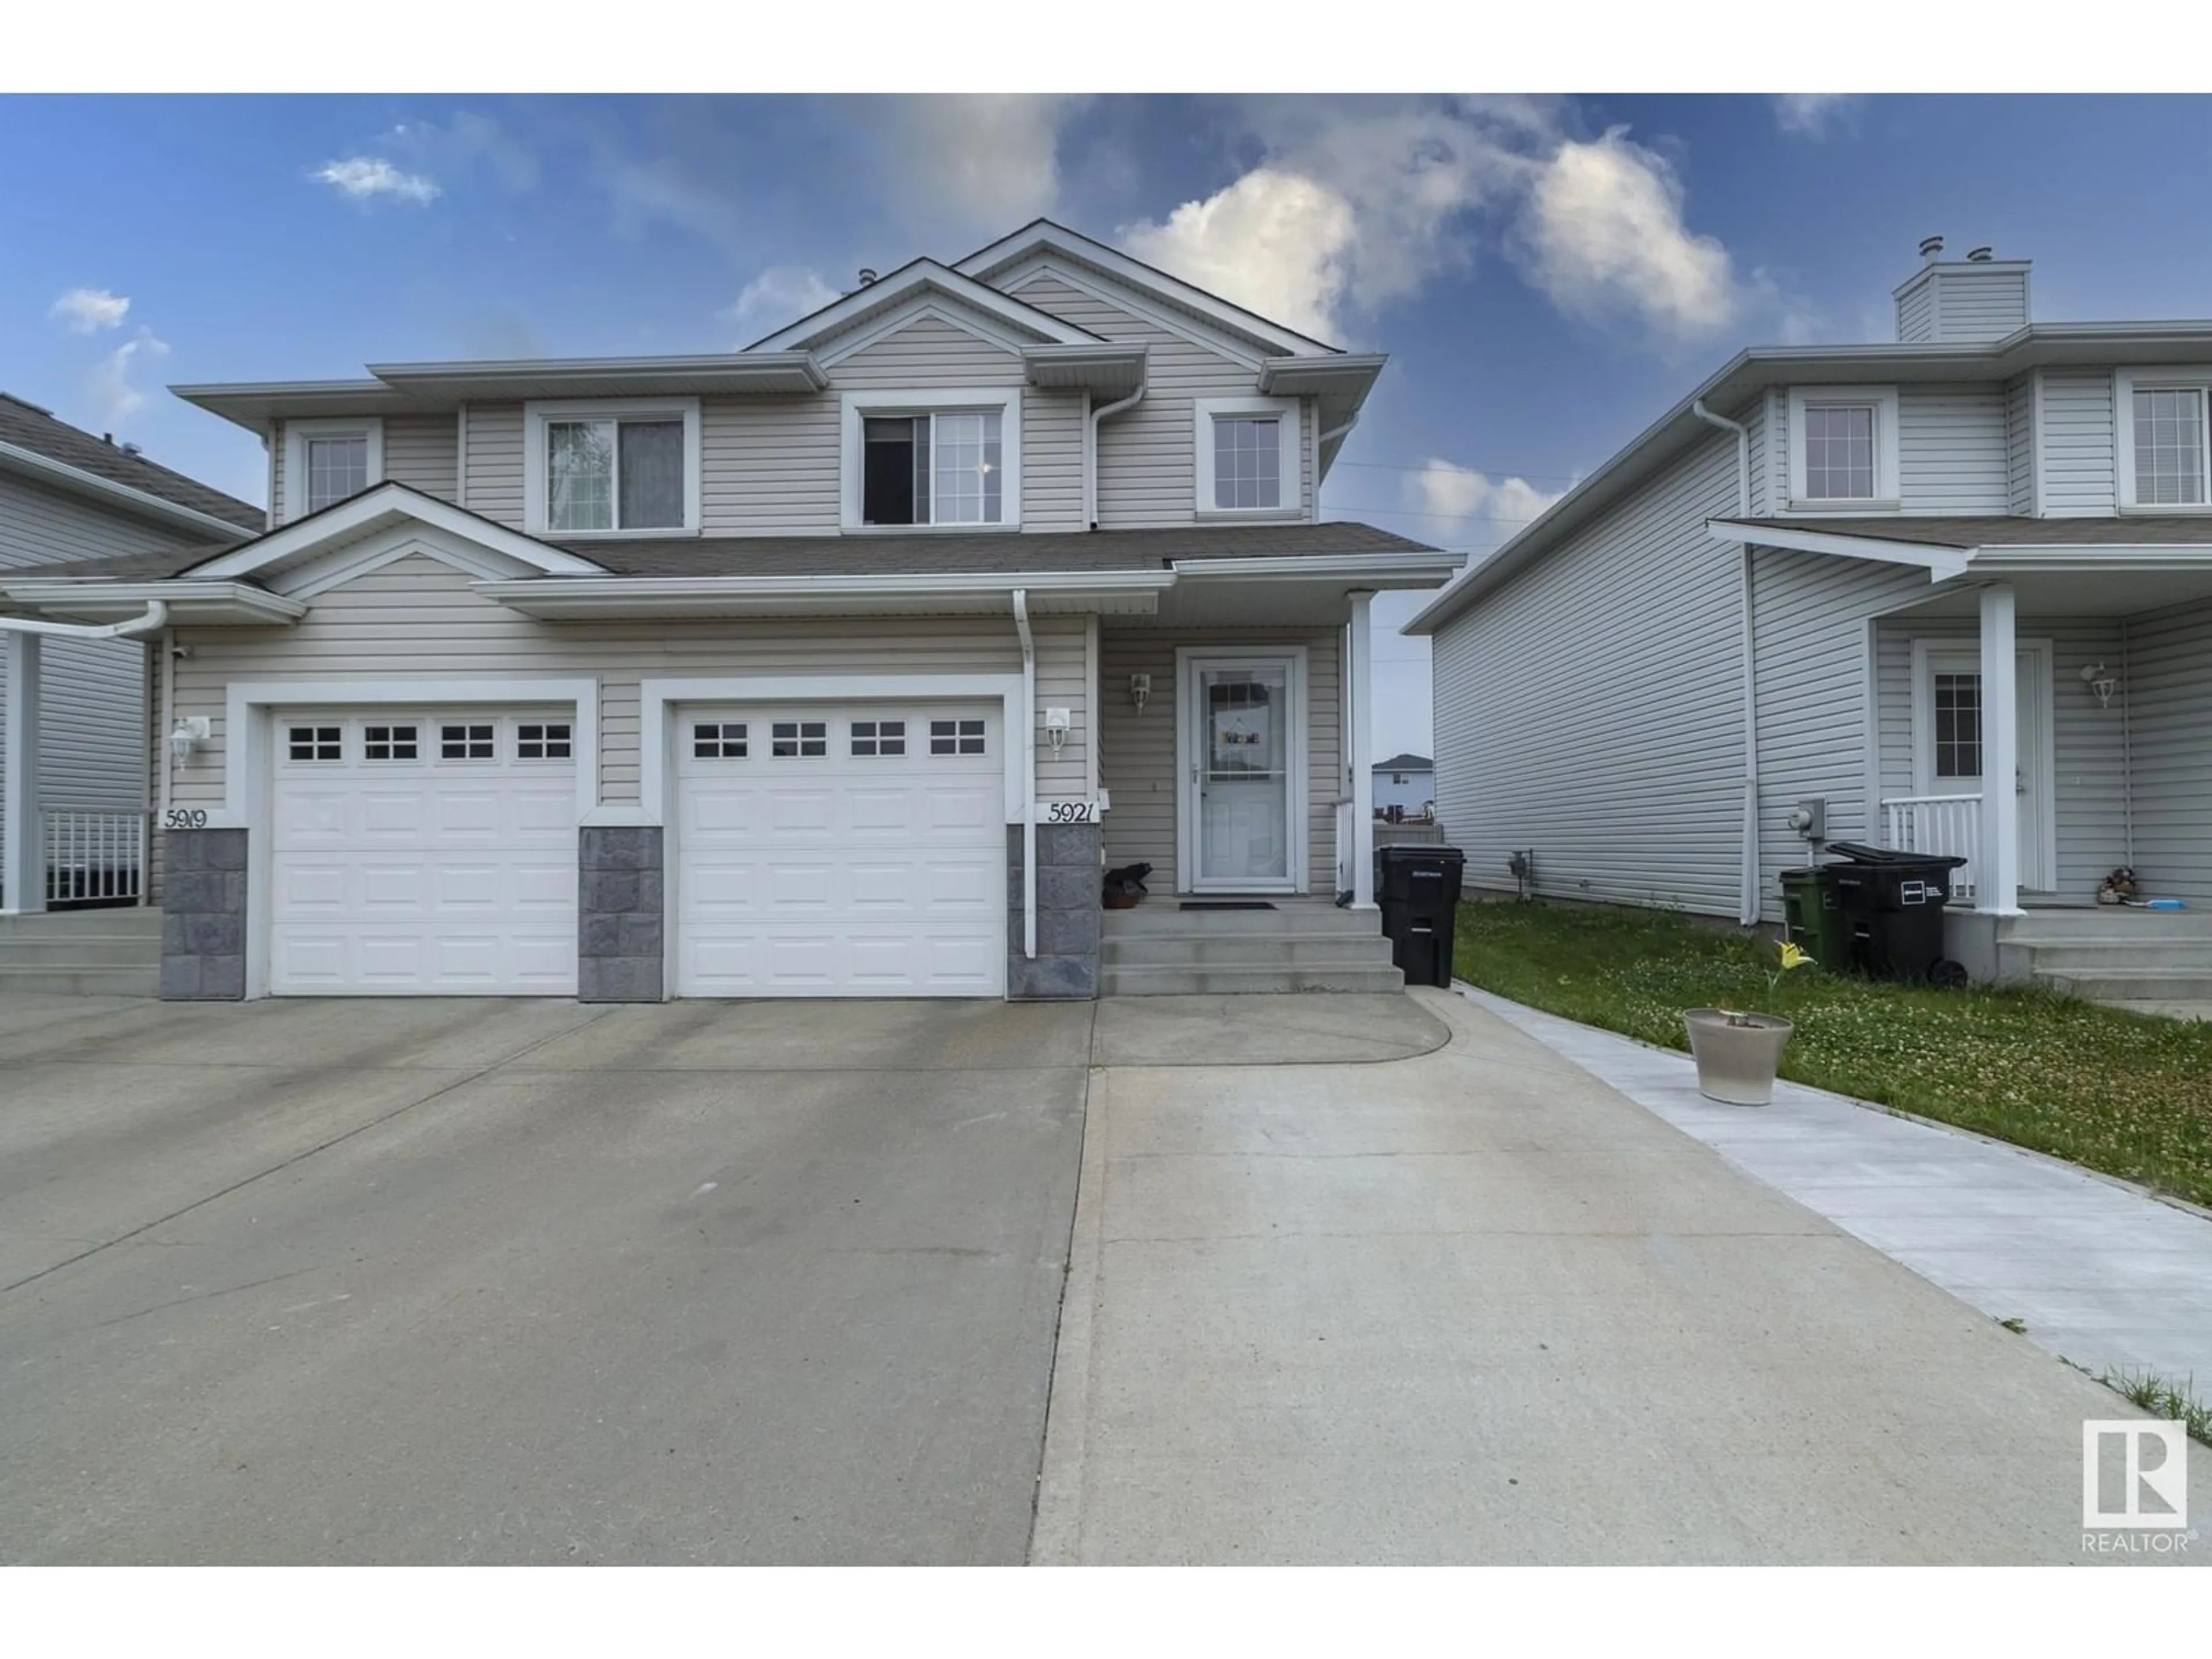 A pic from exterior of the house or condo for 5921 164 AV NW, Edmonton Alberta T5Y0B3